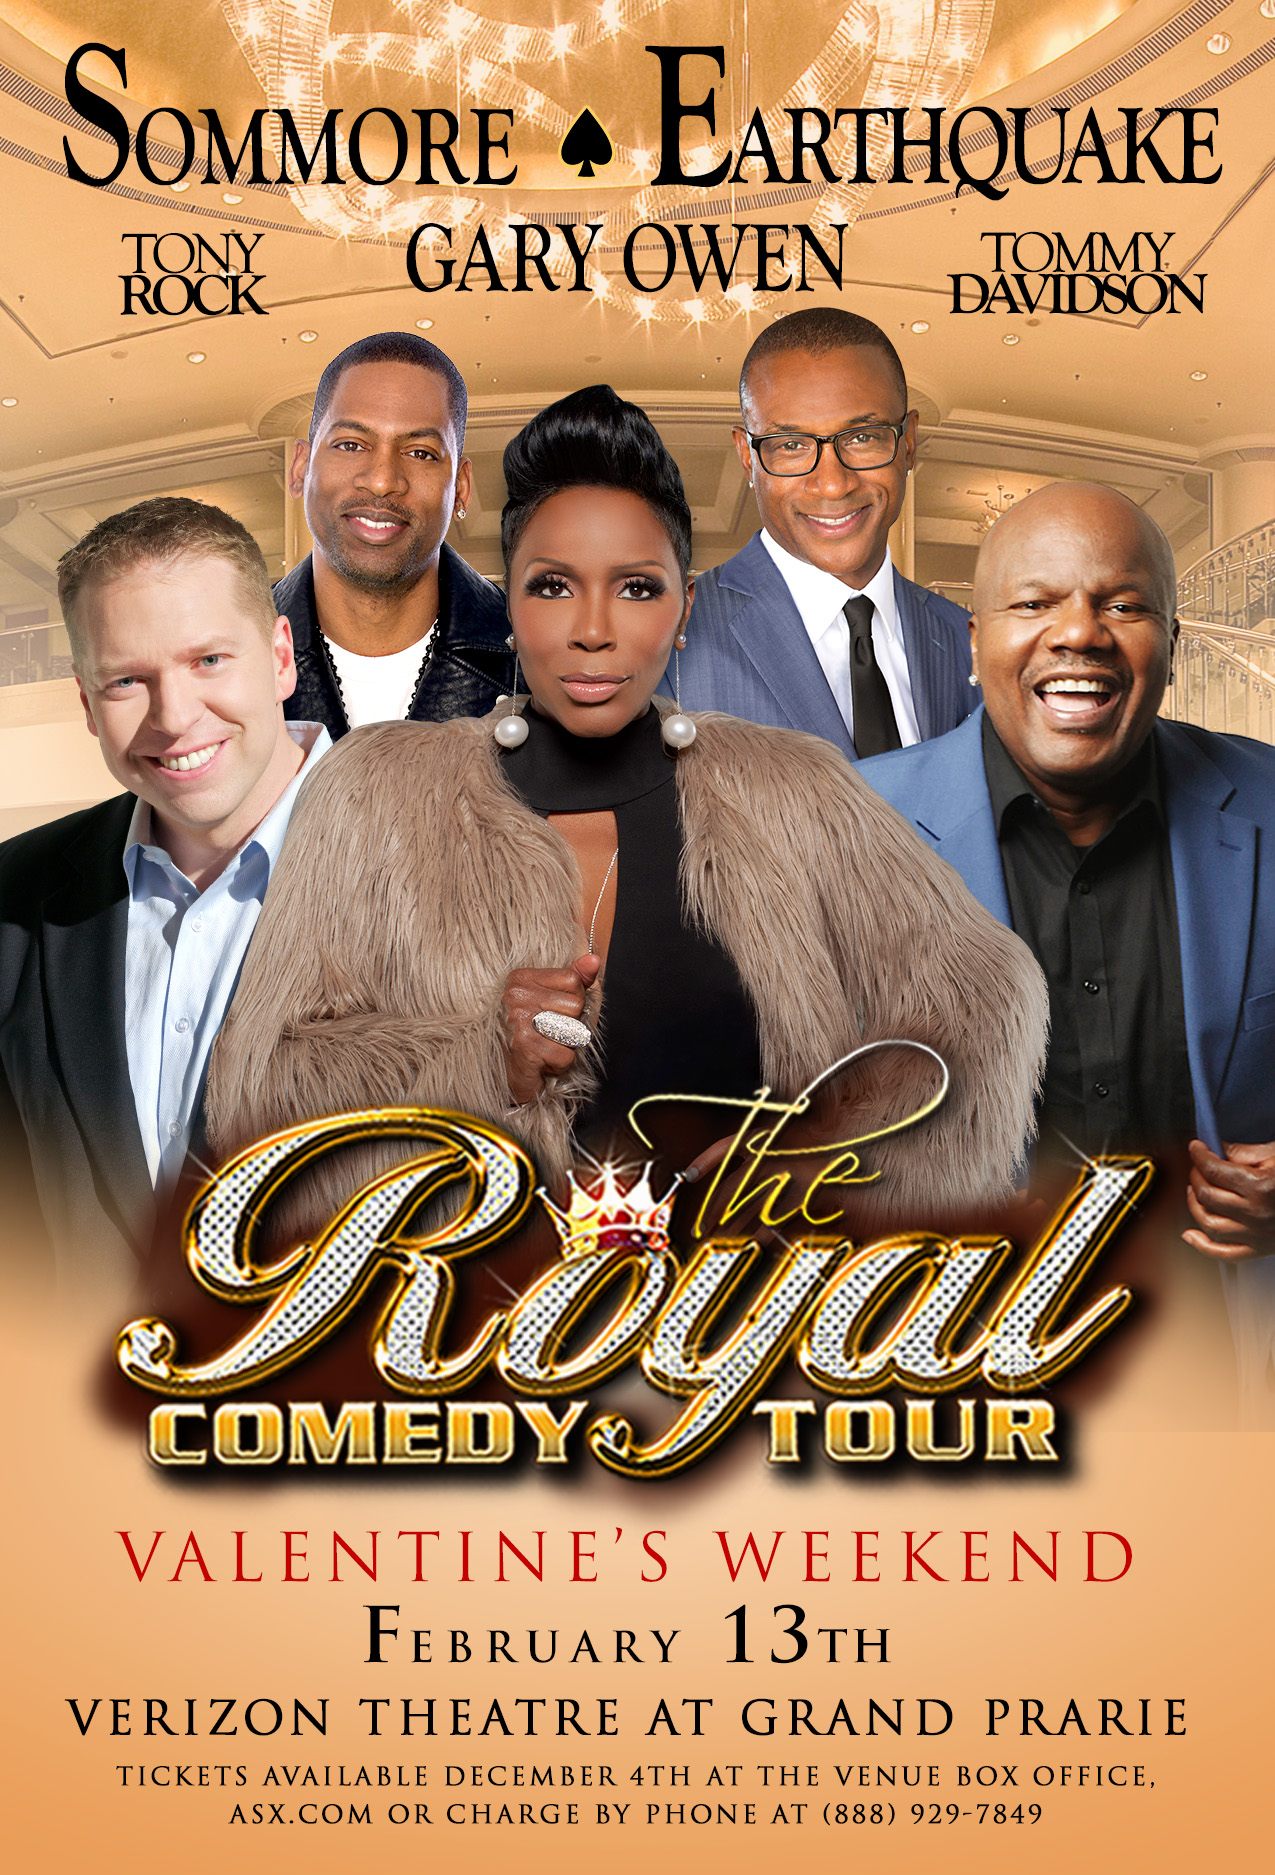 royal comedy tour rochester ny